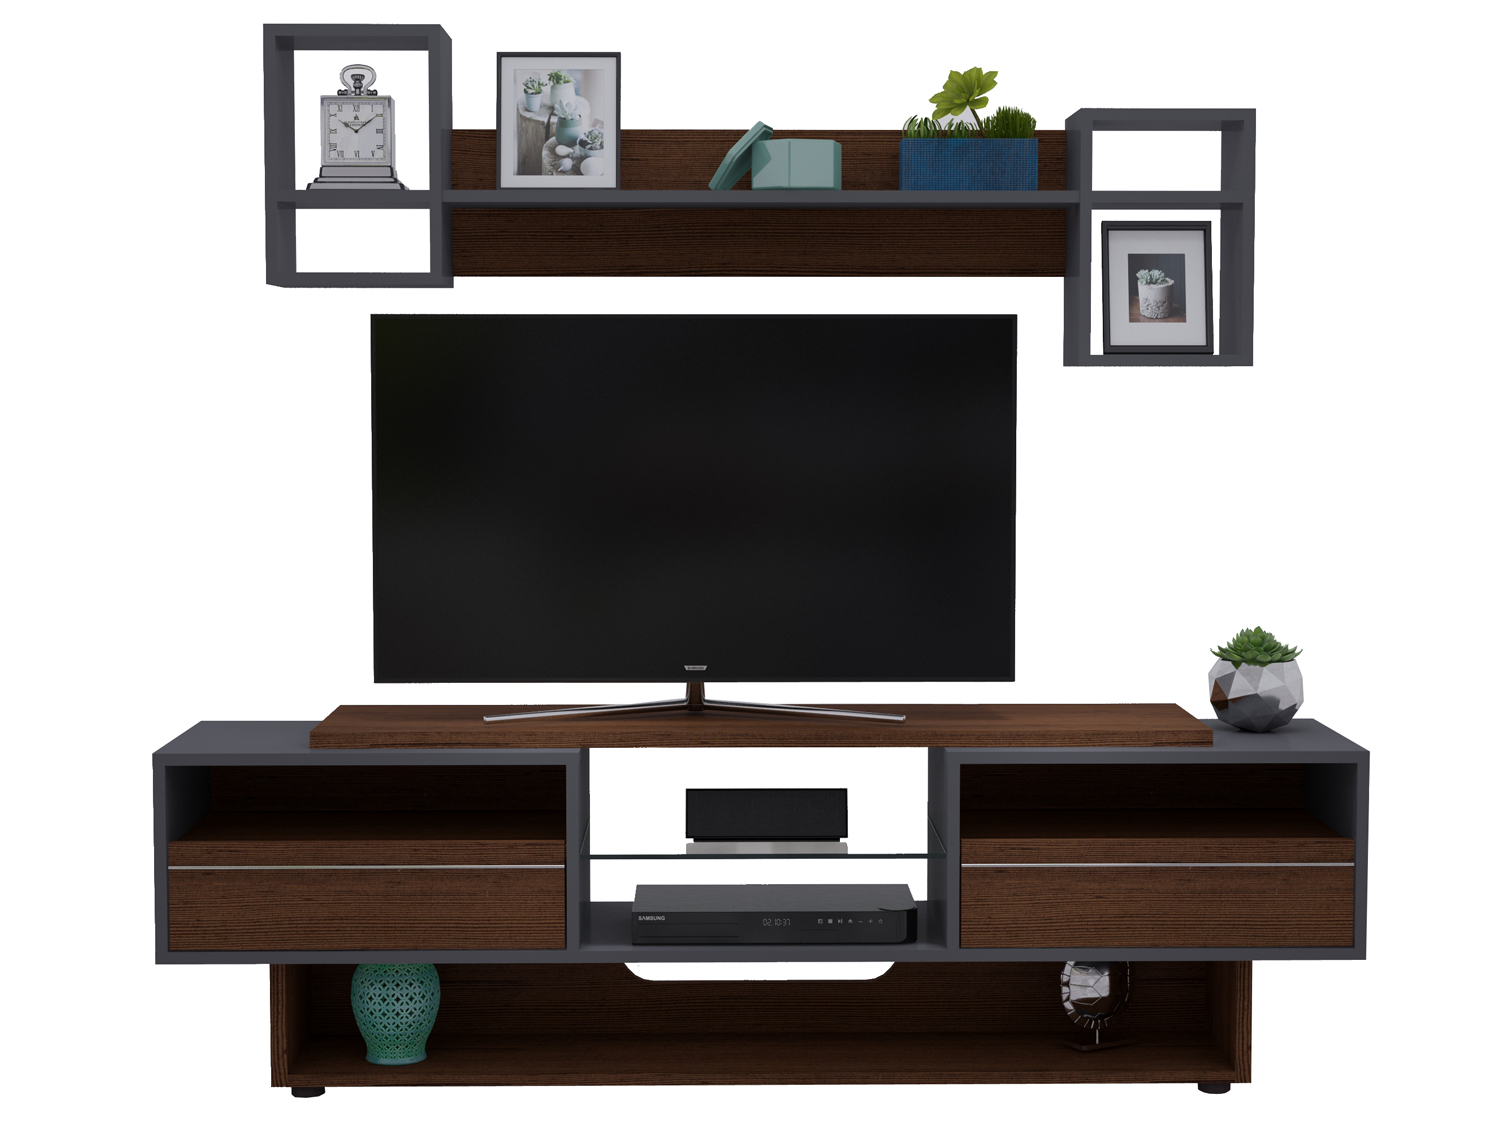 Buy Strata Tv Unit With Wall Shelf @40% OFF India, Best TV Cabinet